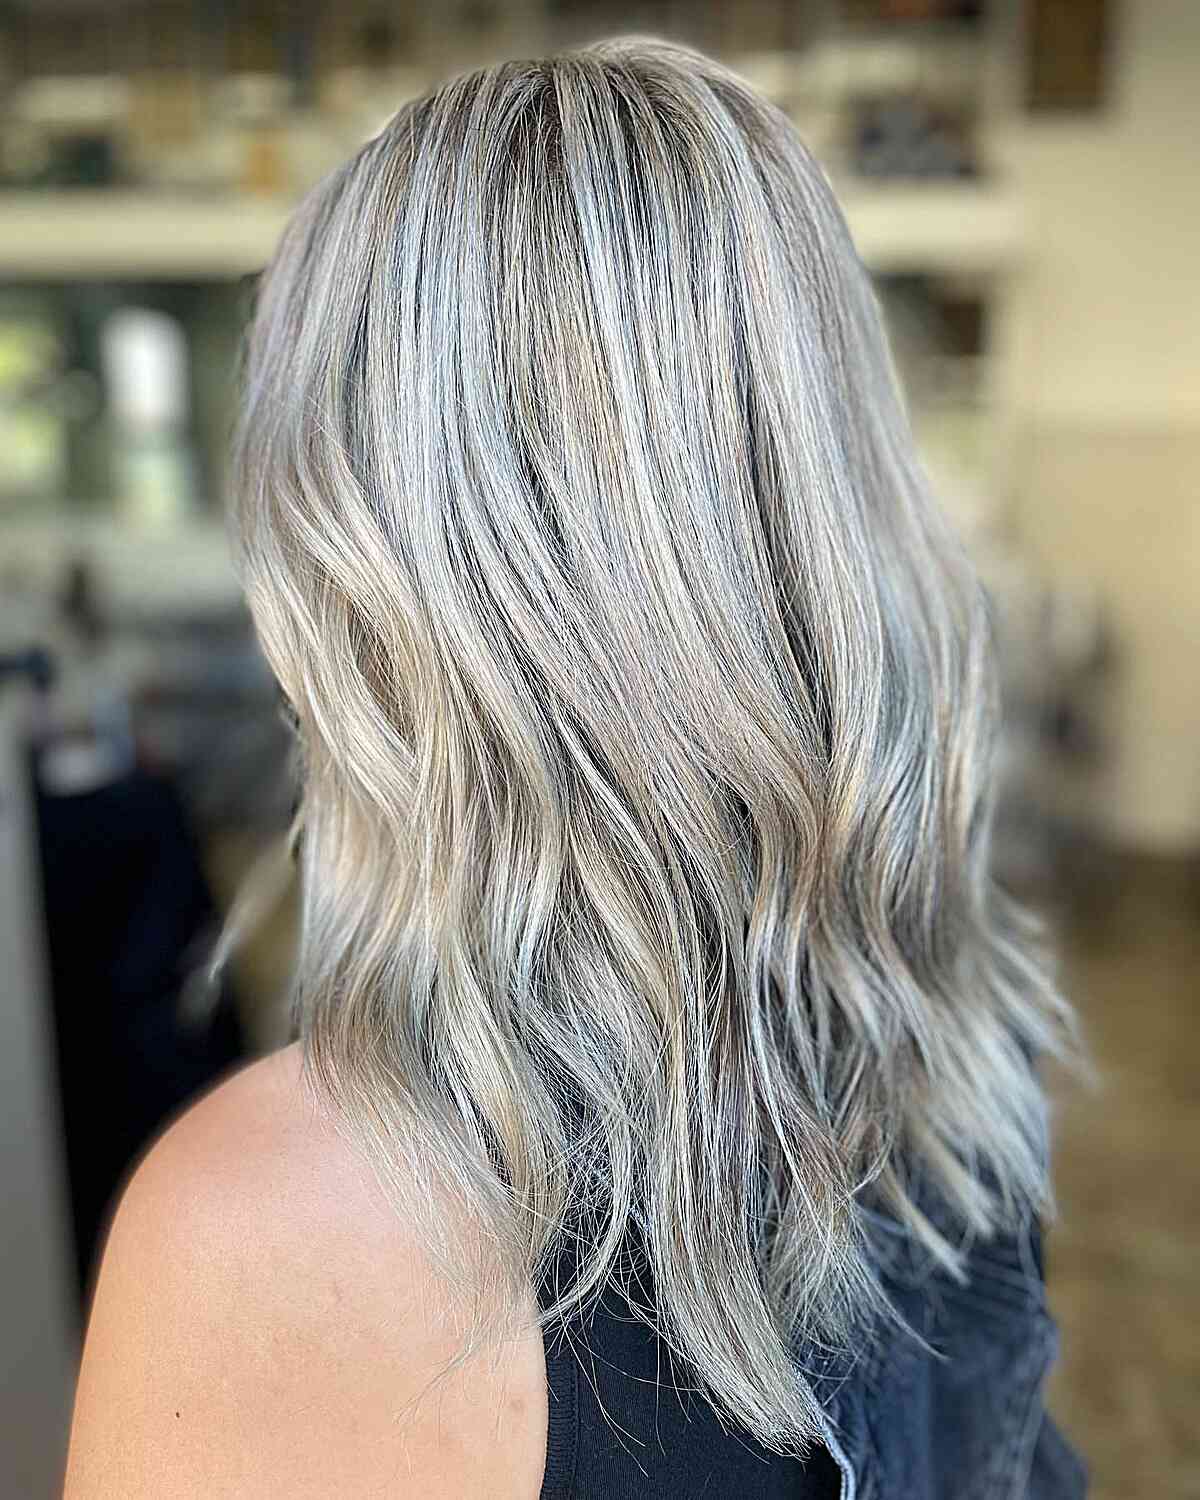 Ashy Grey Icy Tones for Mid-Length Balayage Hair with Soft Layers